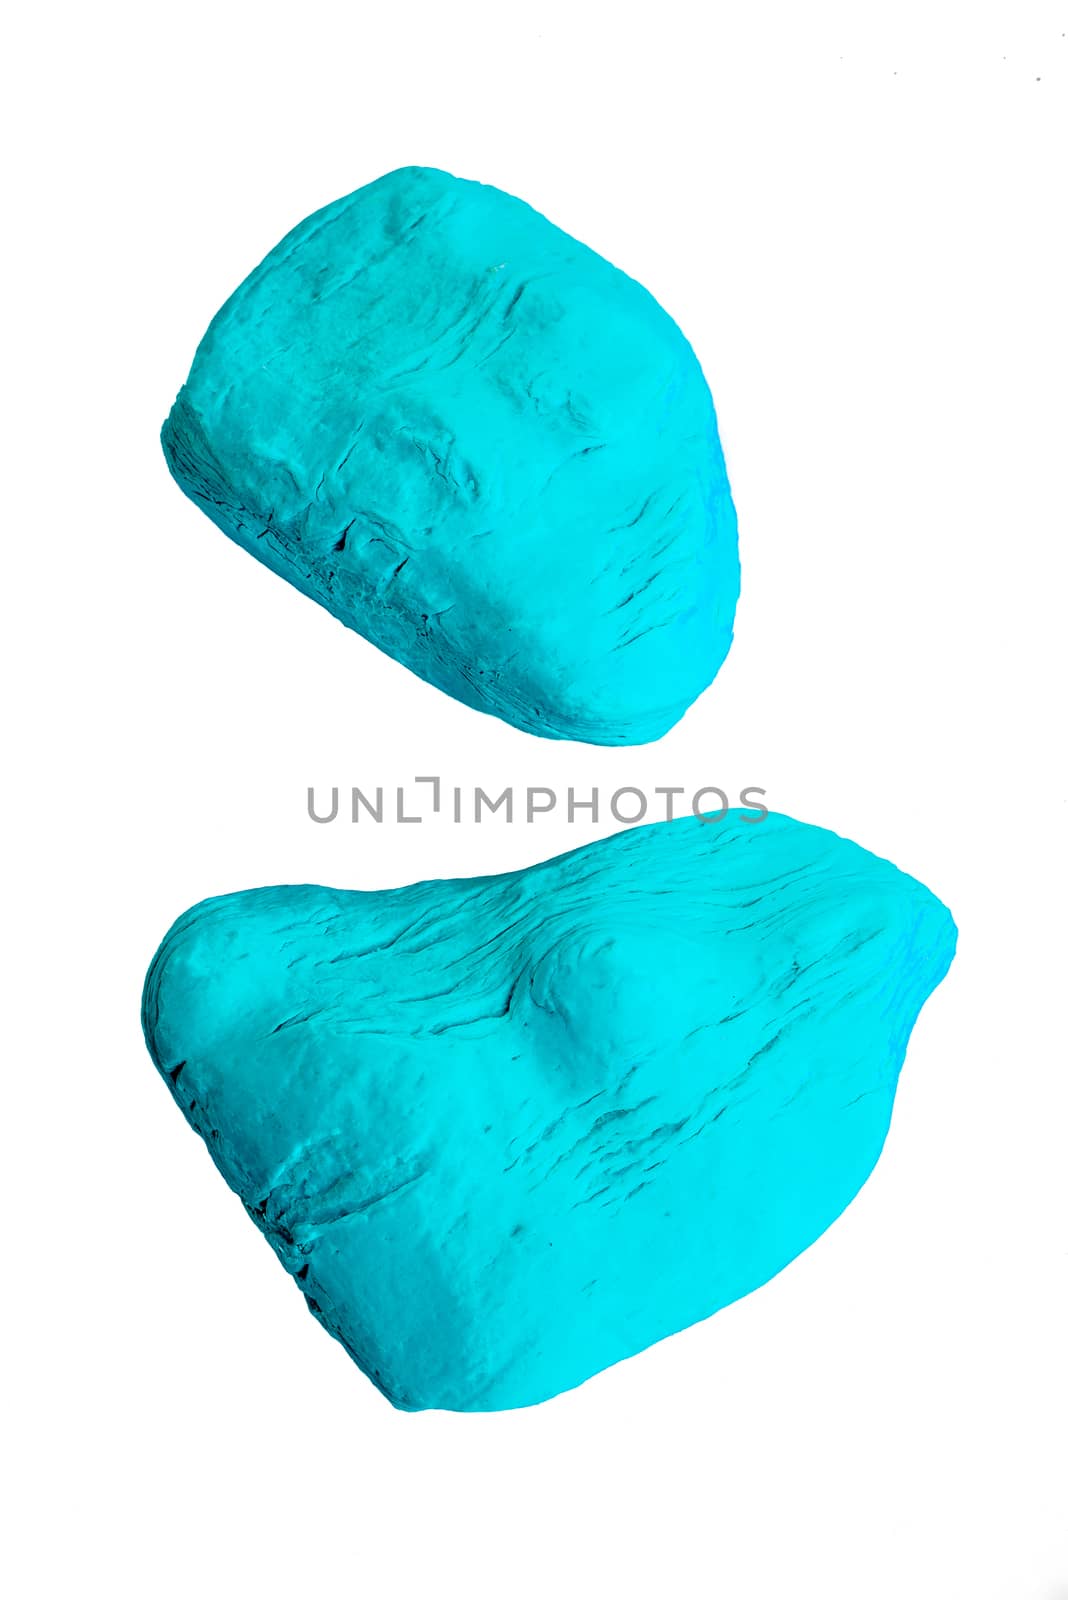 Two used up pieces of blue soap on isolated white background.